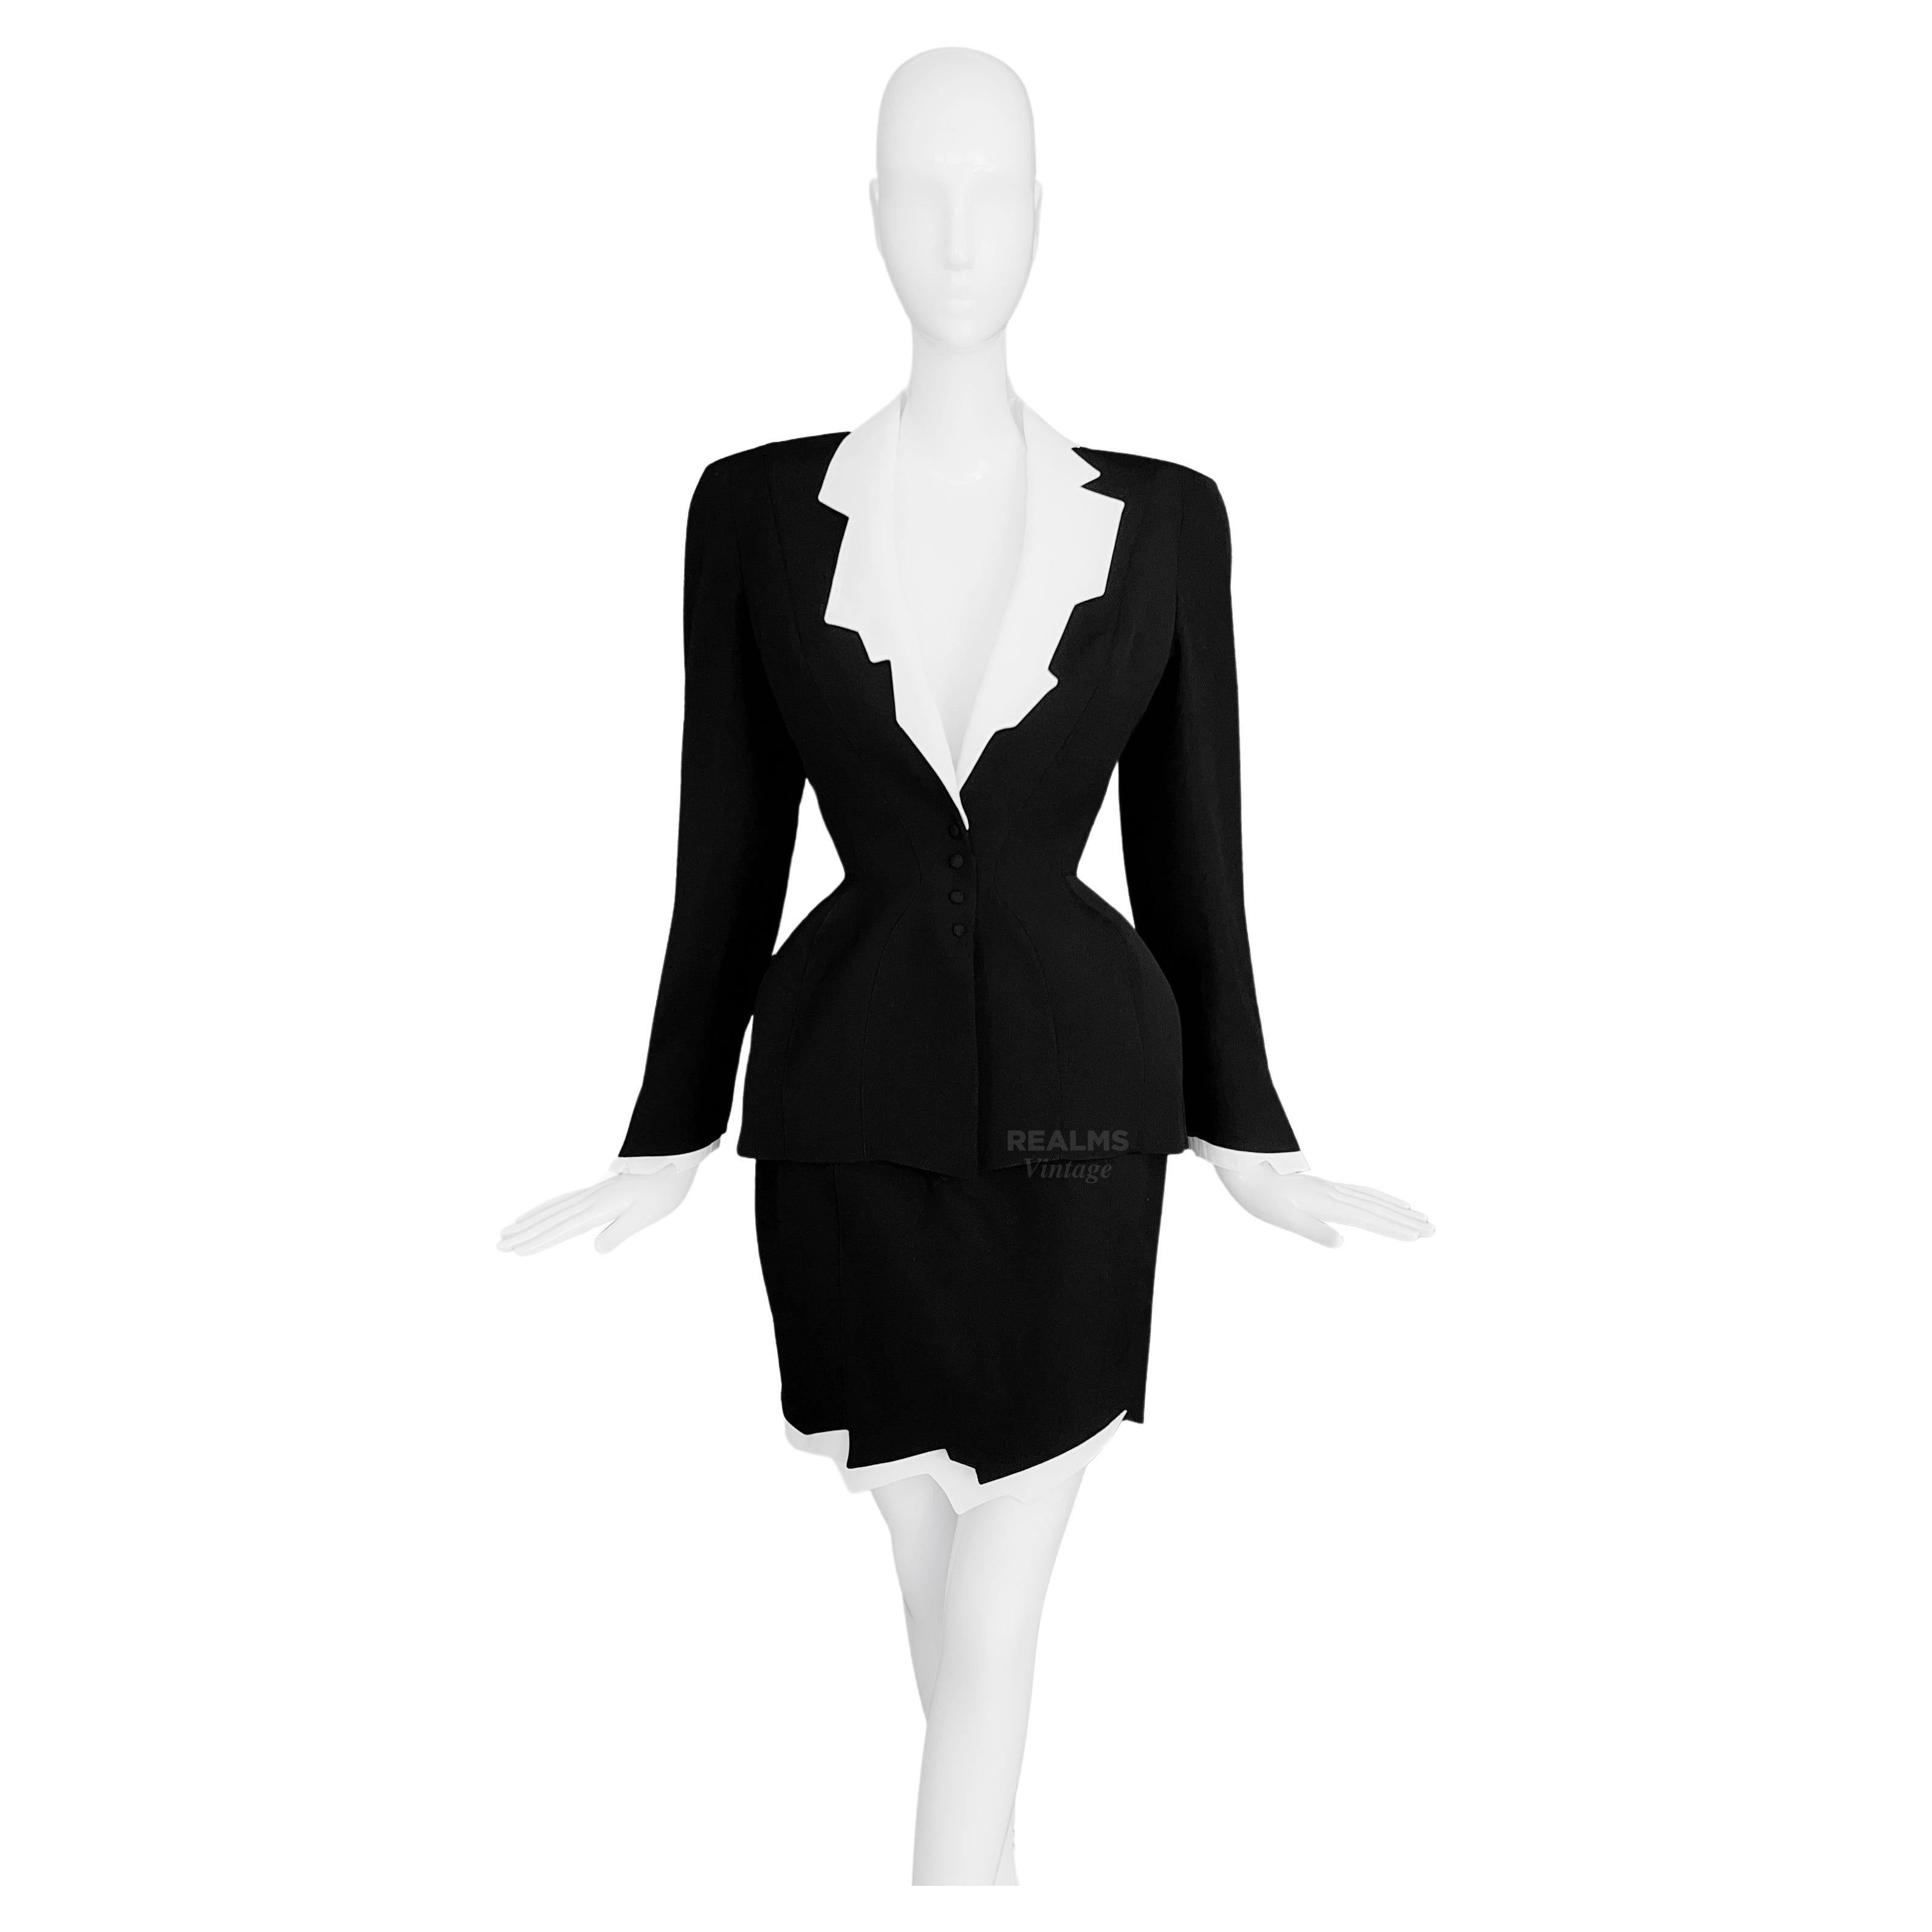 Thierry Mugler SS1994 Archival Iconic Runway Suit Sculptural ZigZag Jacket Skirt